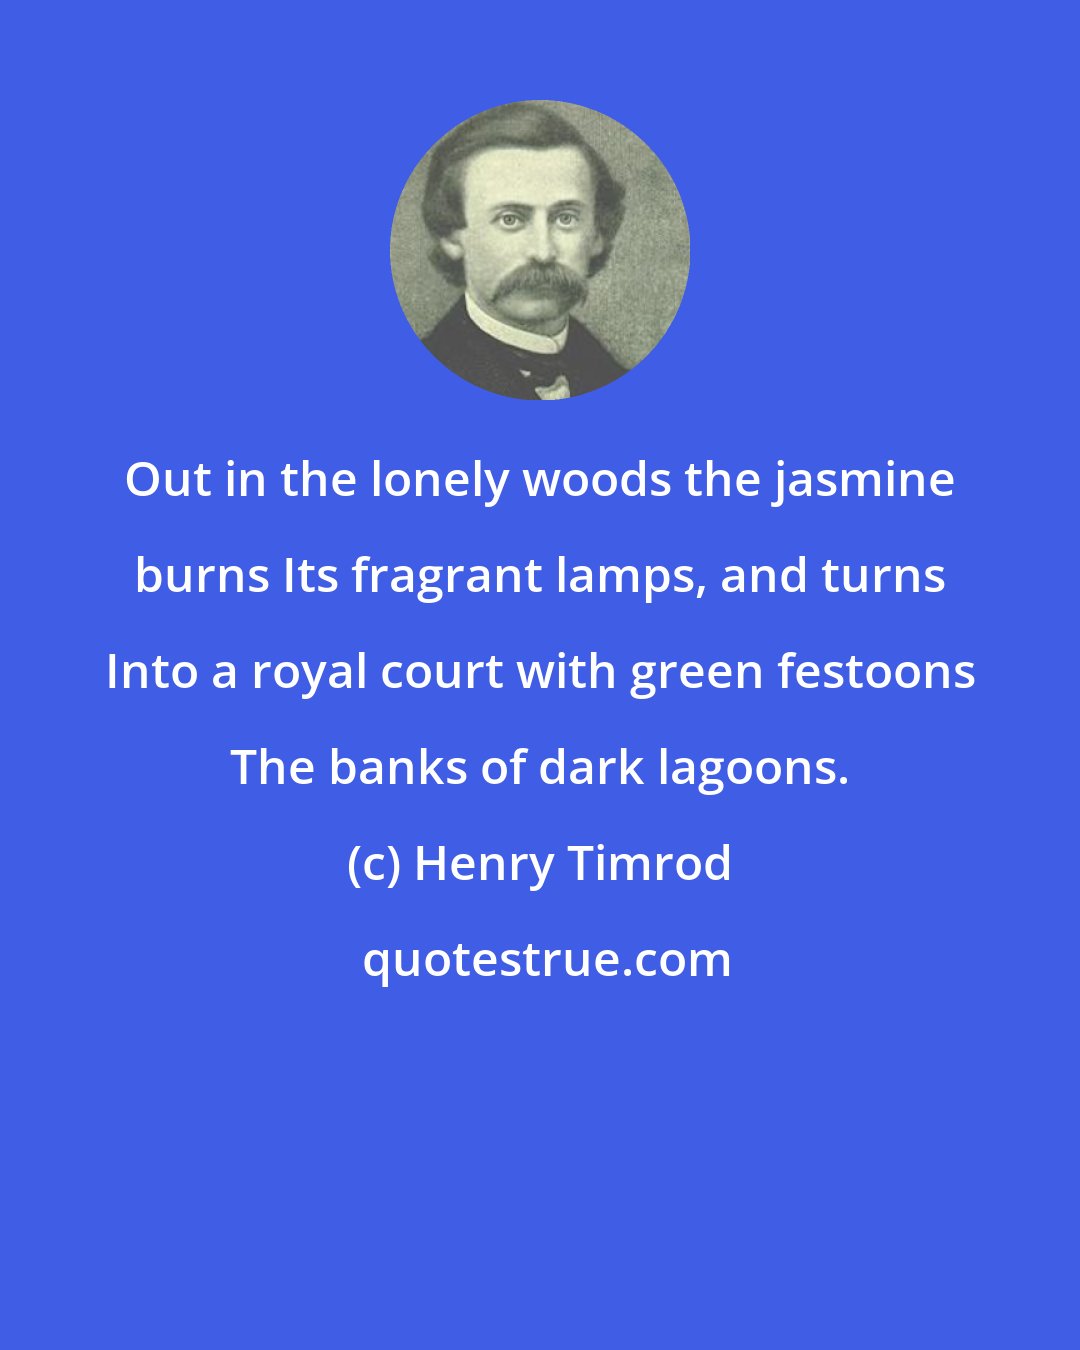 Henry Timrod: Out in the lonely woods the jasmine burns Its fragrant lamps, and turns Into a royal court with green festoons The banks of dark lagoons.